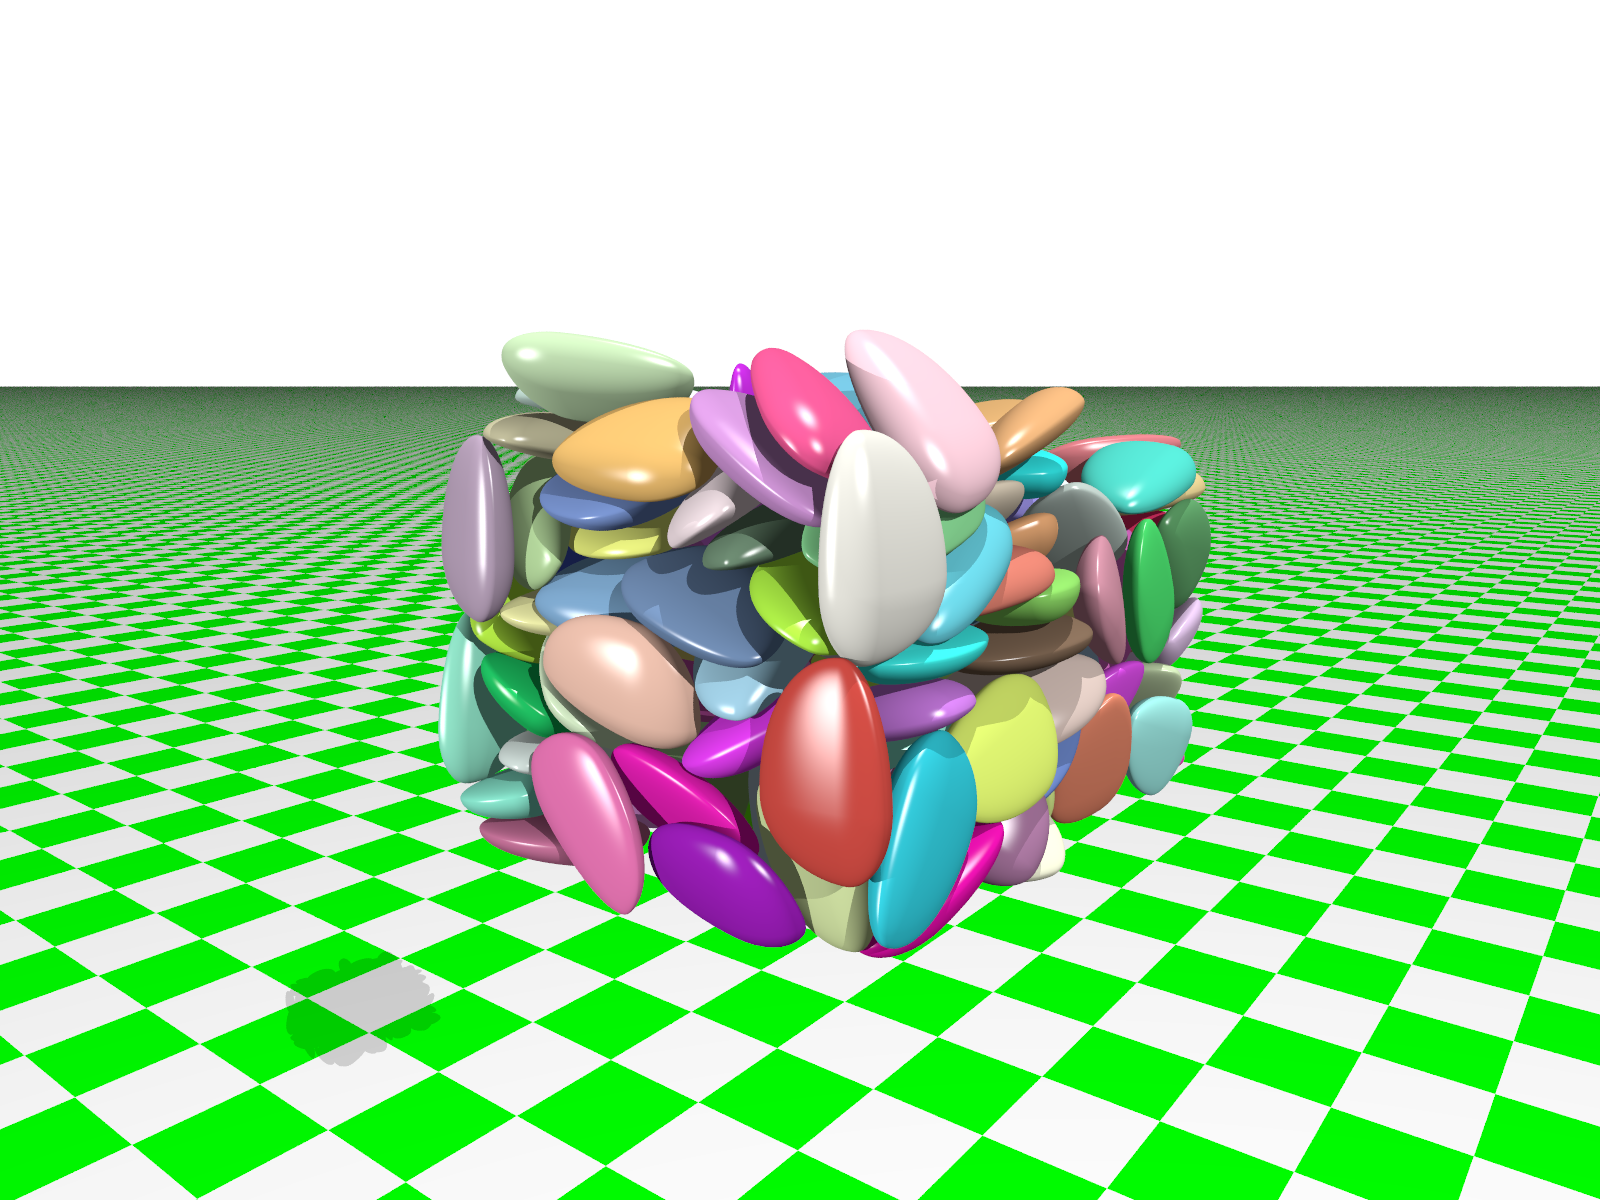 Packing of poly-superellipsoids in Example 4 rendered by
<em>POV-Ray</em>.